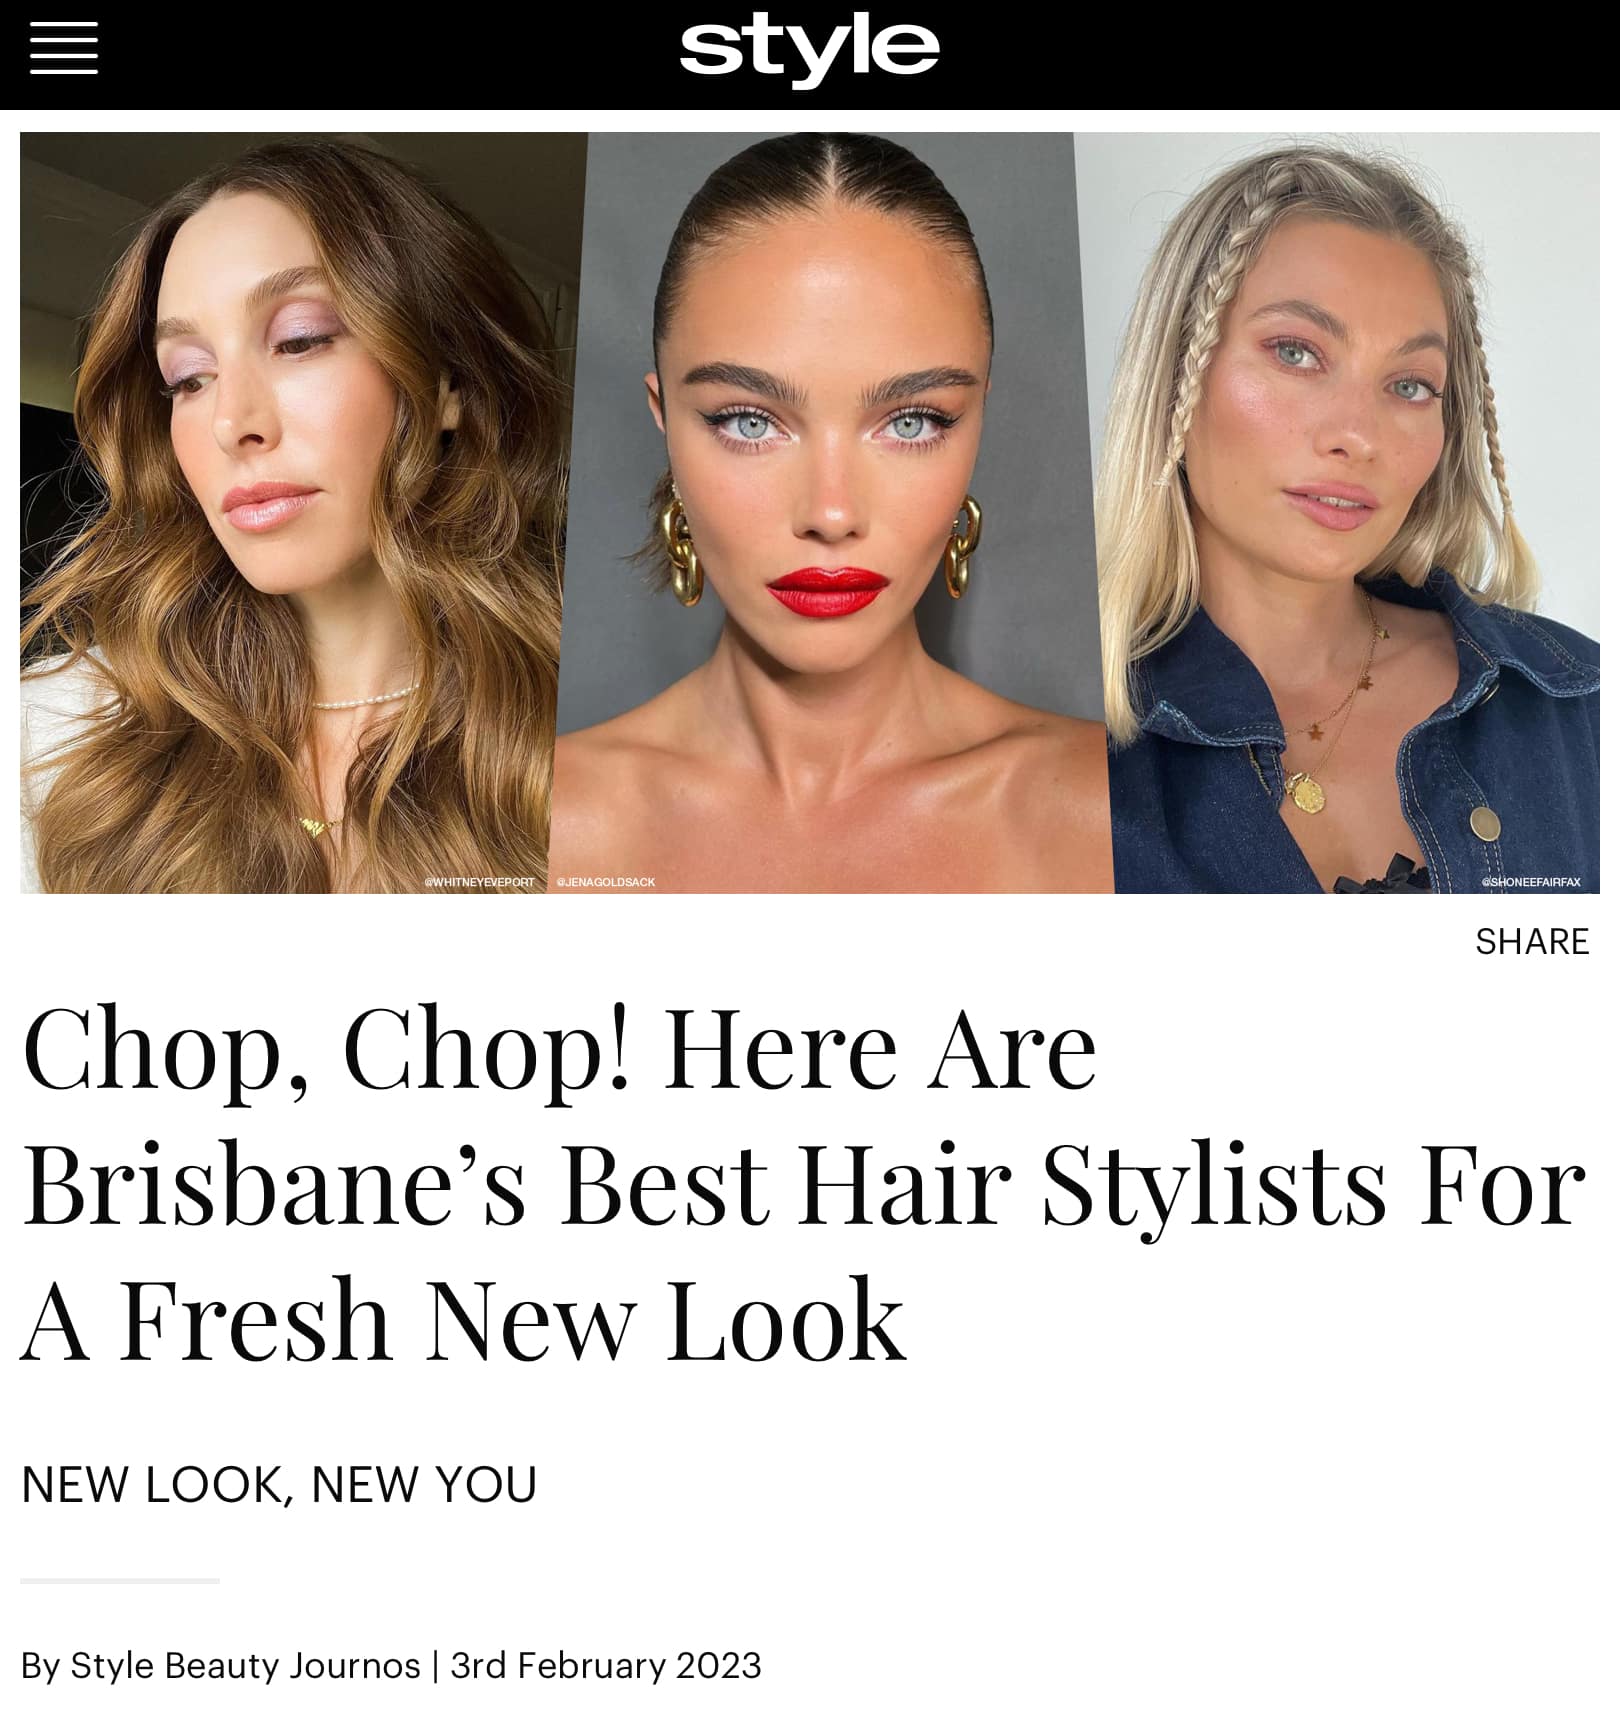 Style Magazines / 2023: Brisbane's Best Hair Stylists - Co and Pace Salons